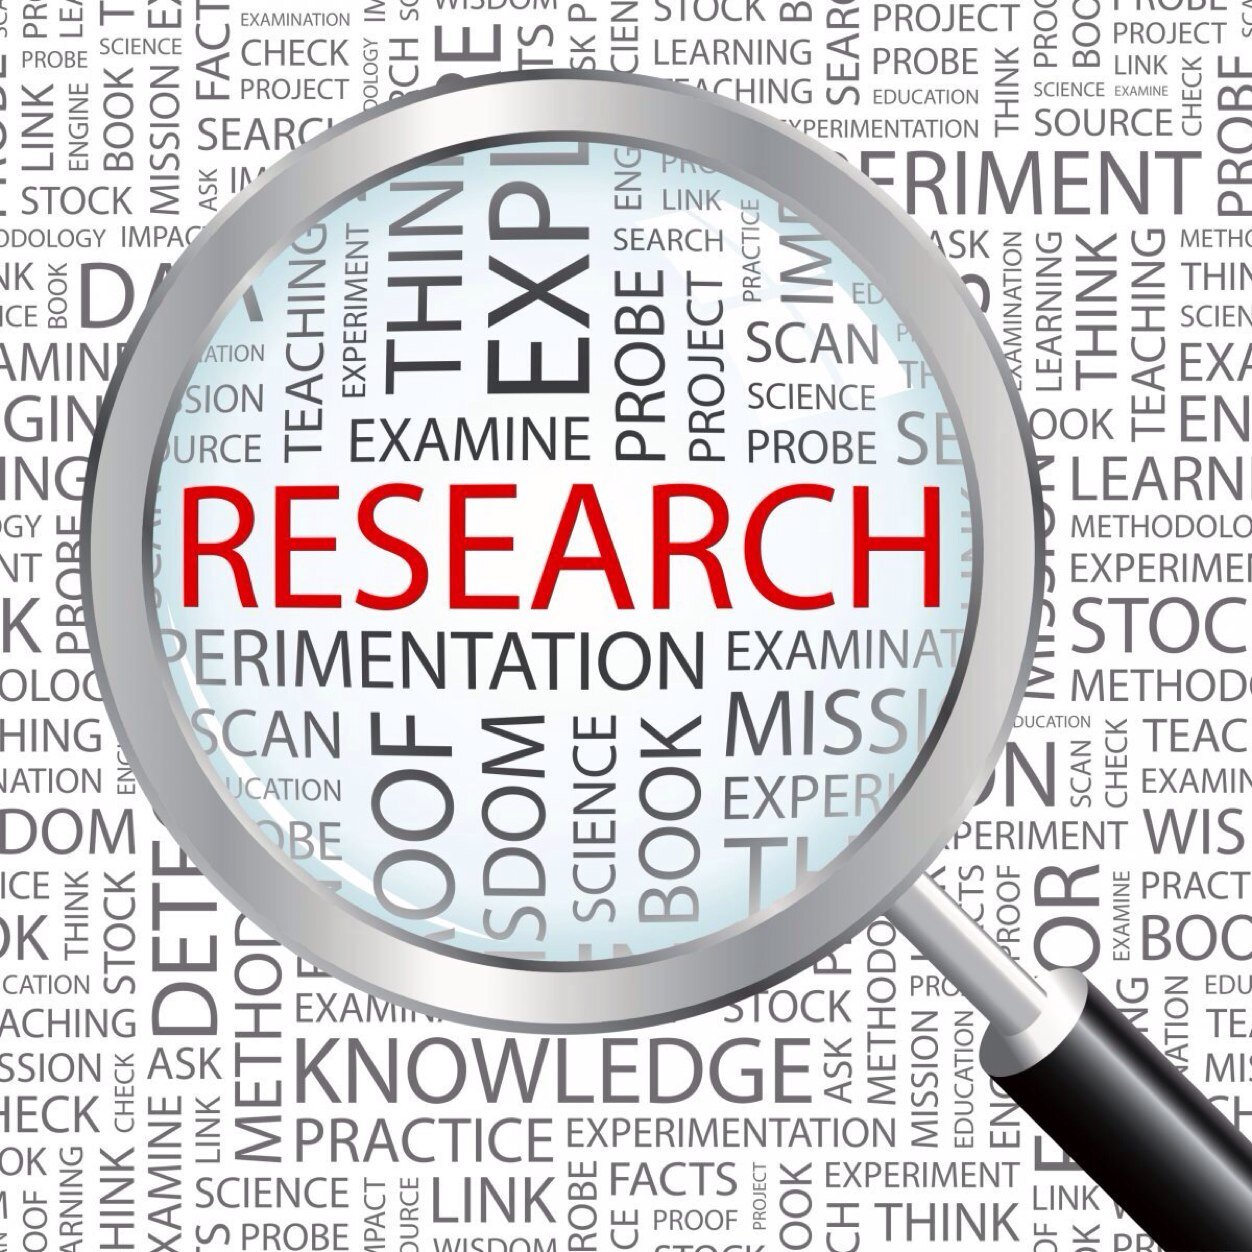 methodology of a research work